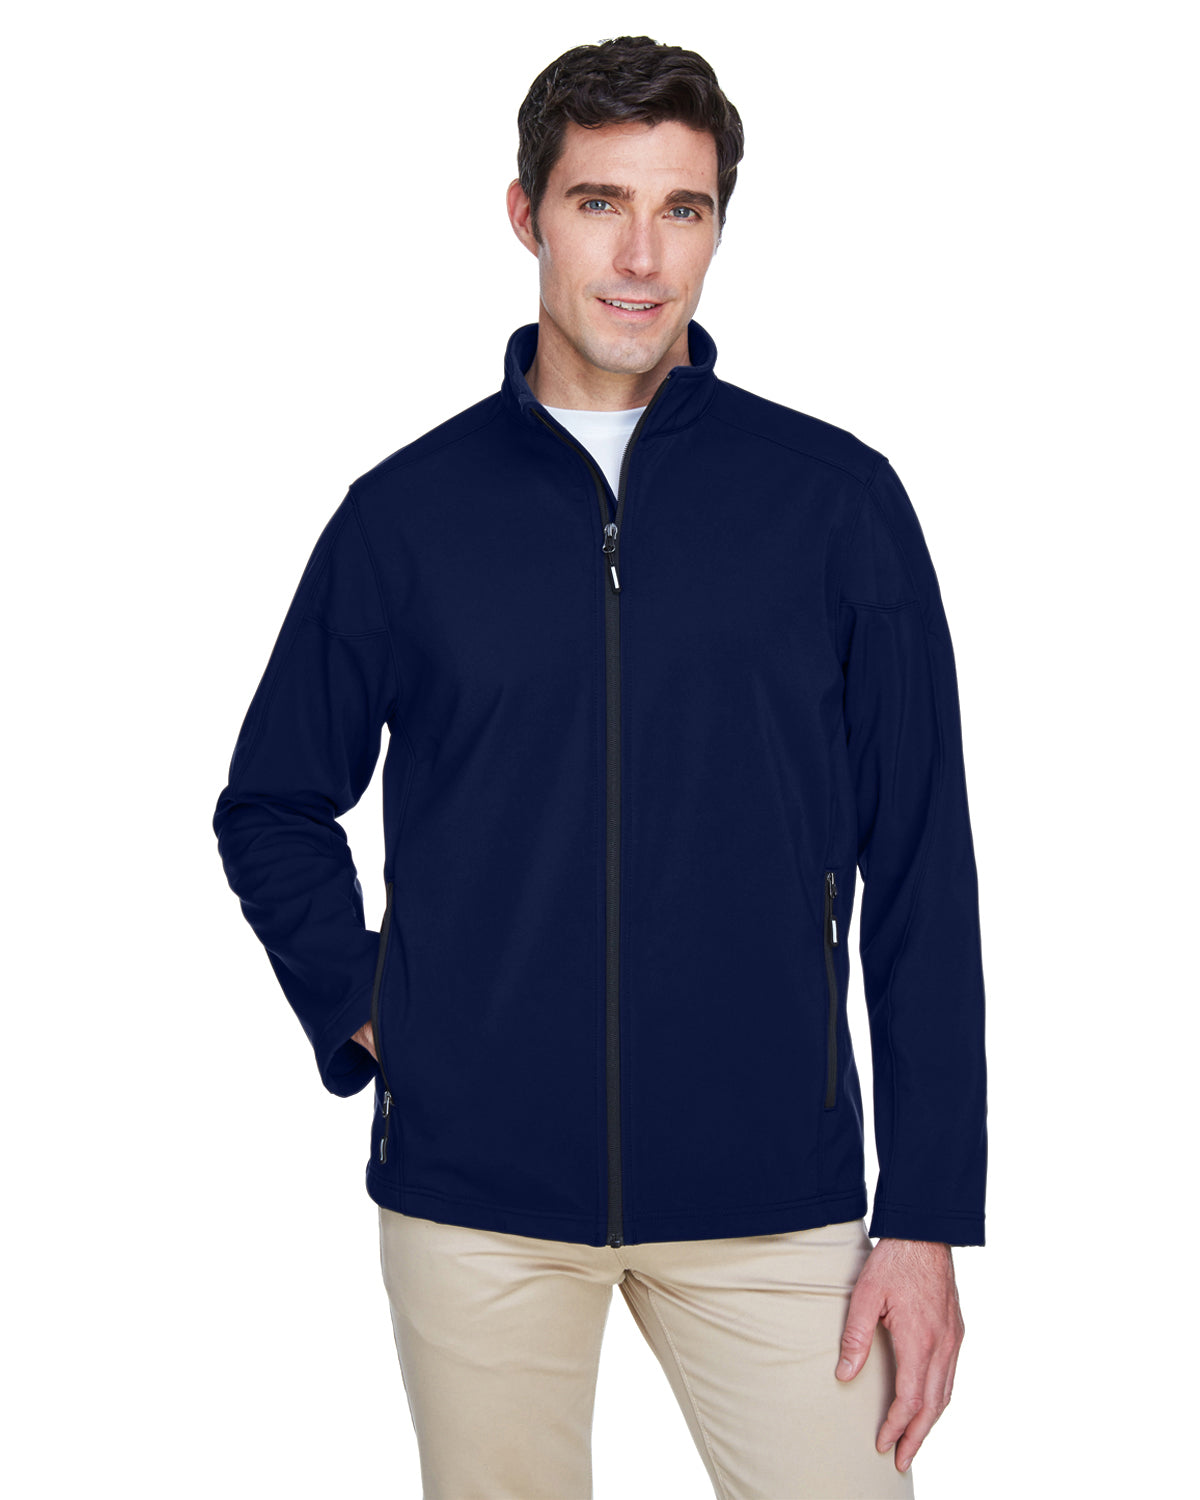 88184 CORE365 Men's Cruise Two-Layer Fleece Bonded Soft Shell Jacket